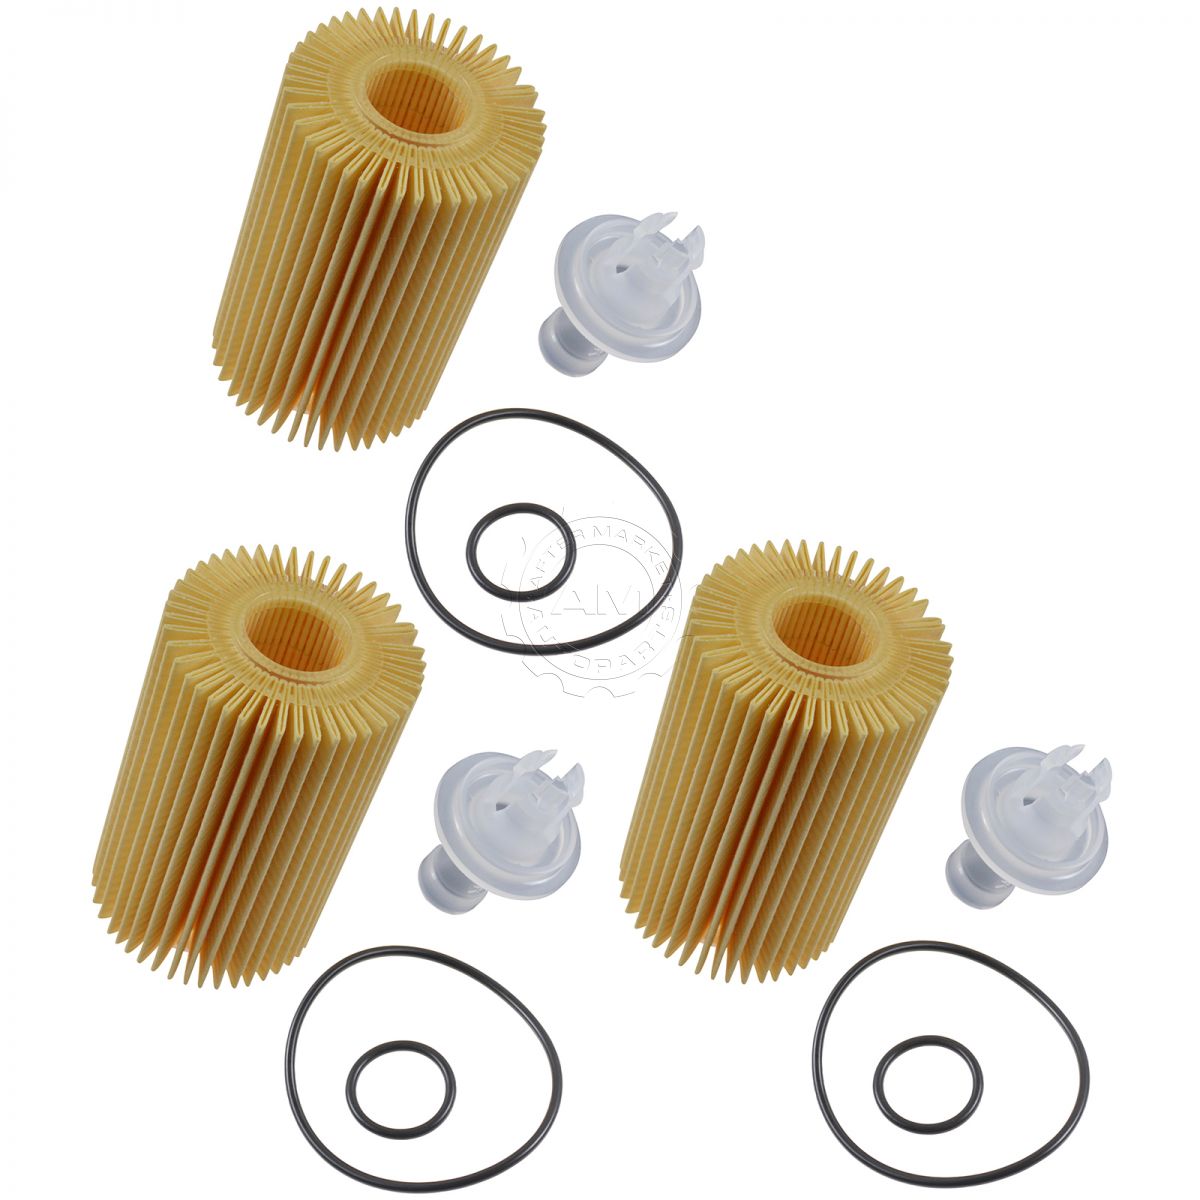 Oem 04152 Yzza4 Engine Oil Filter Cartridge Set Of 3 For Toyota